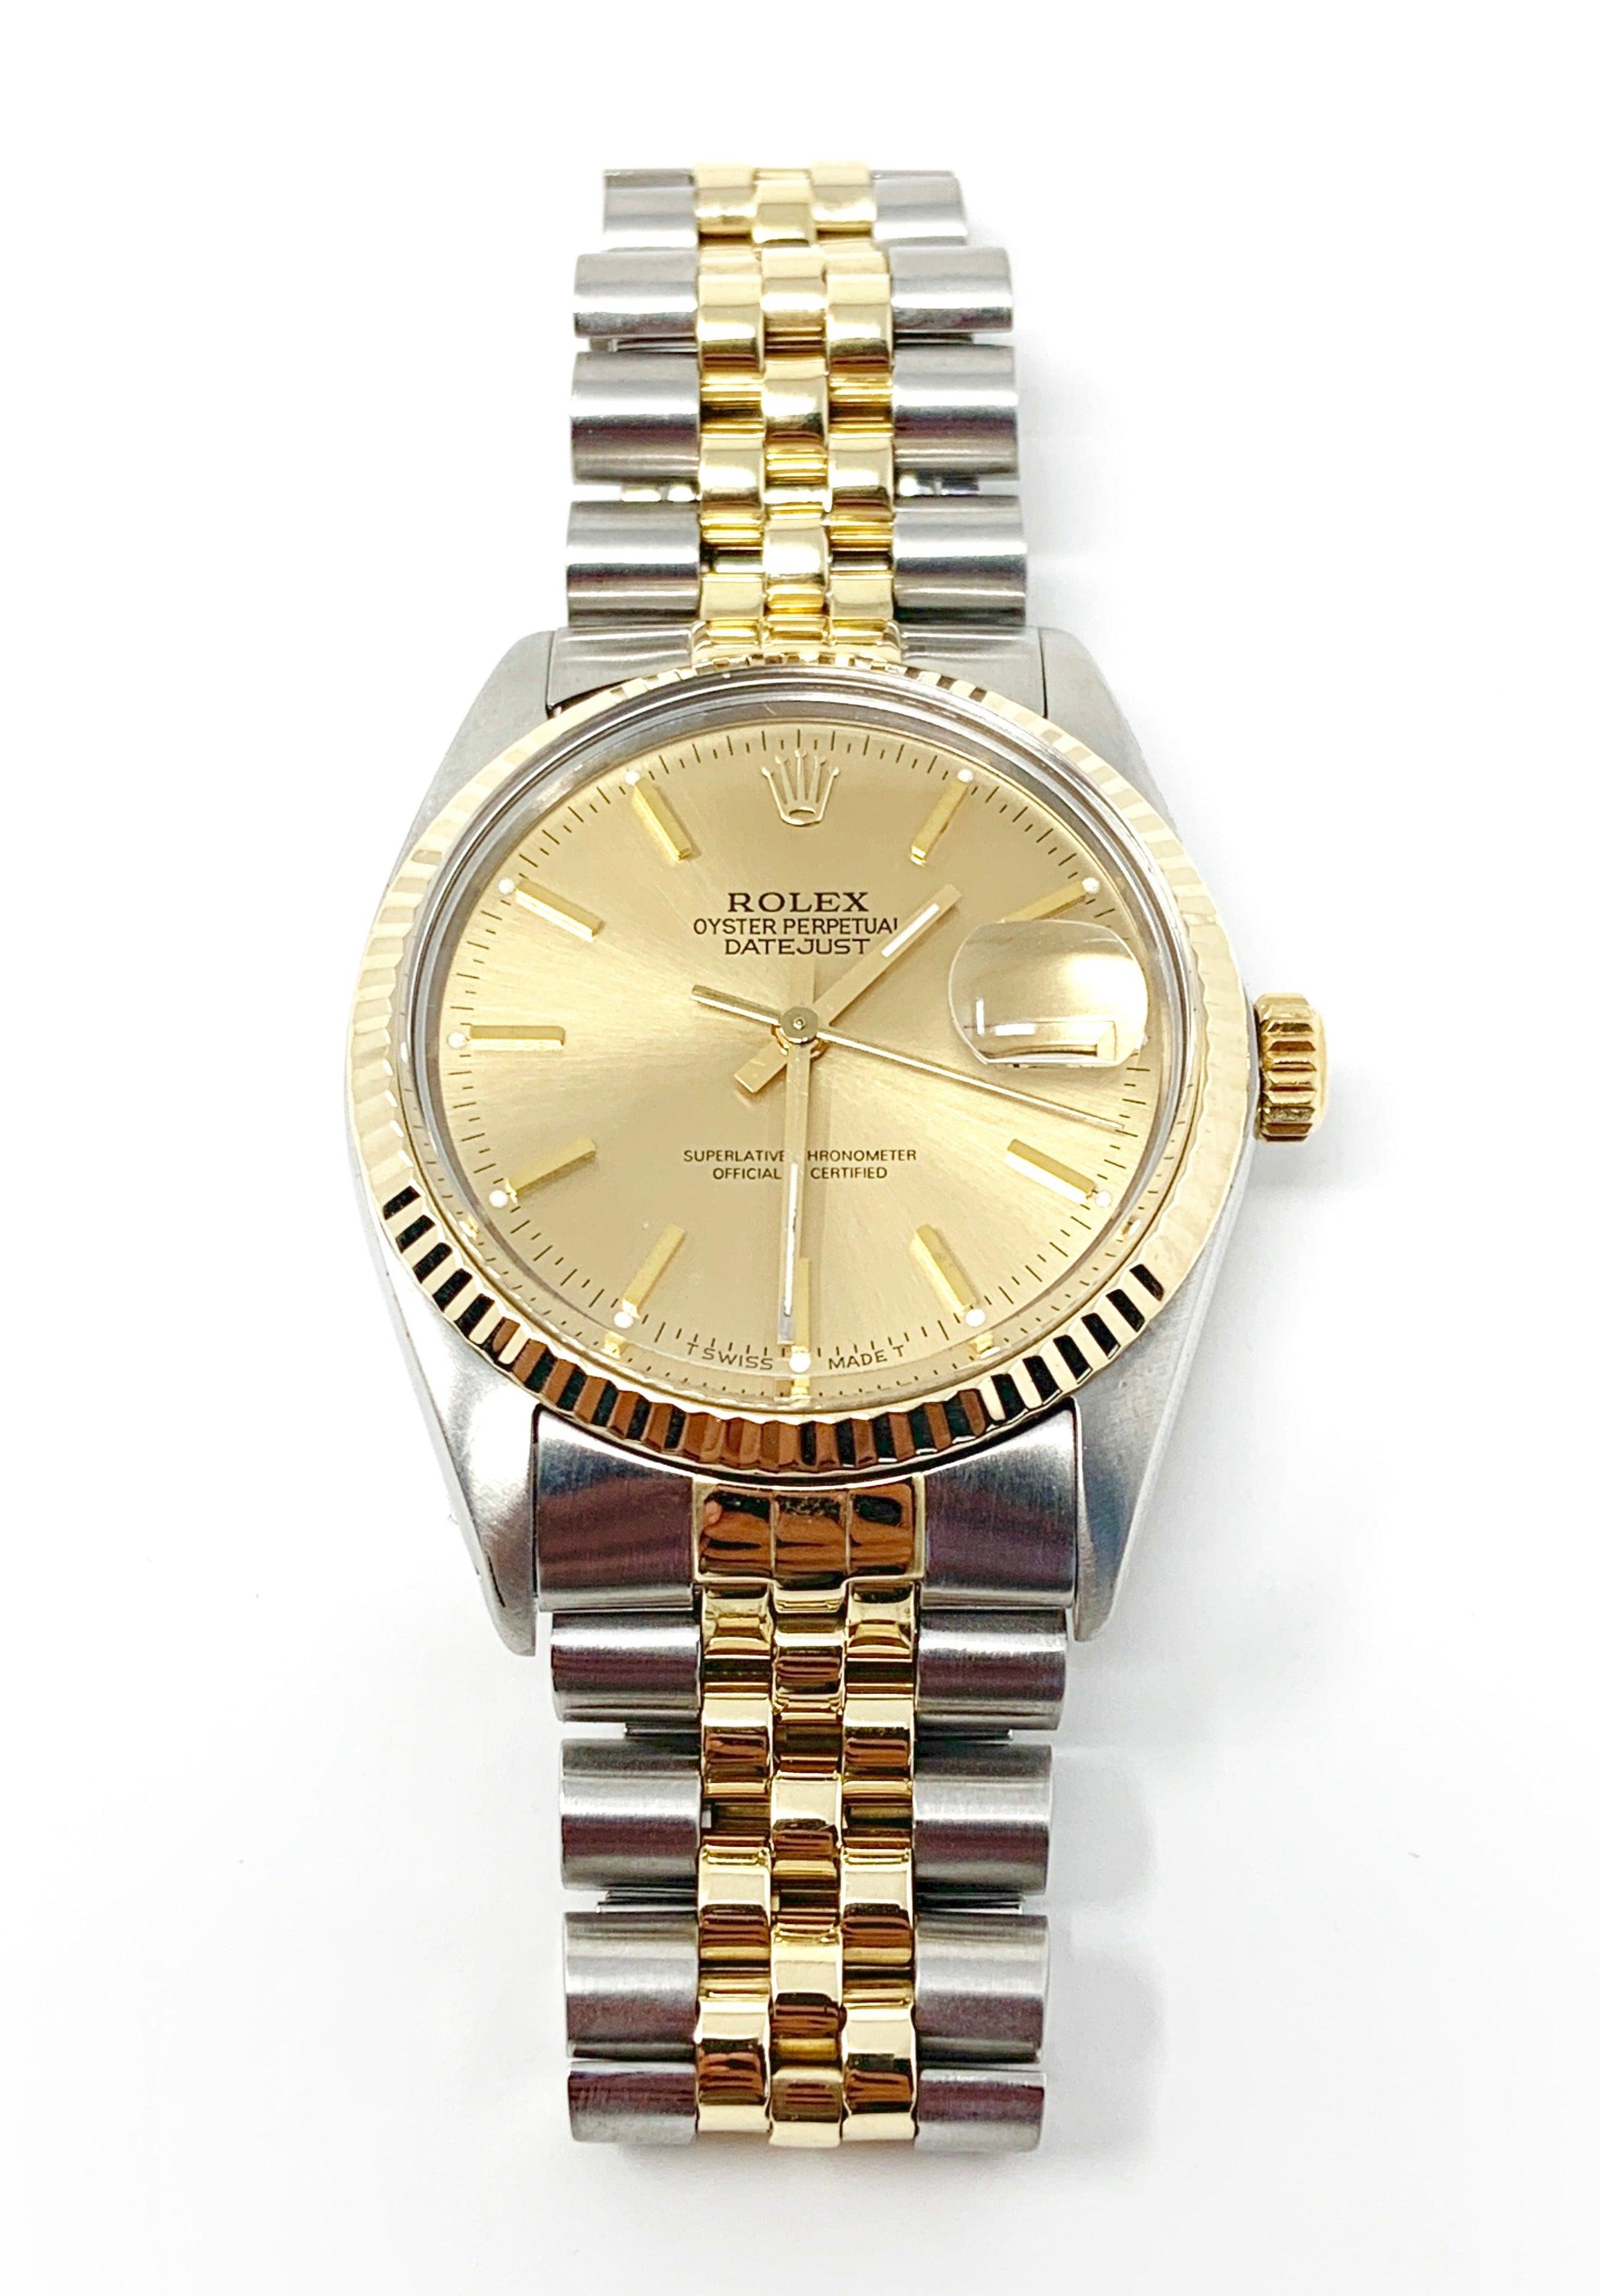 (Watch Description)
Brand - Rolex
Style - Datejust 
Model - 16013
Metals - 36mm
Case size - 36mm
Bezel - 18k yellow gold fluted. 
Crystal - New Acrylic
Dial - Champagne stick
Movement - Auto CAL-3035
Band - Rolex two-tone Jubilee

